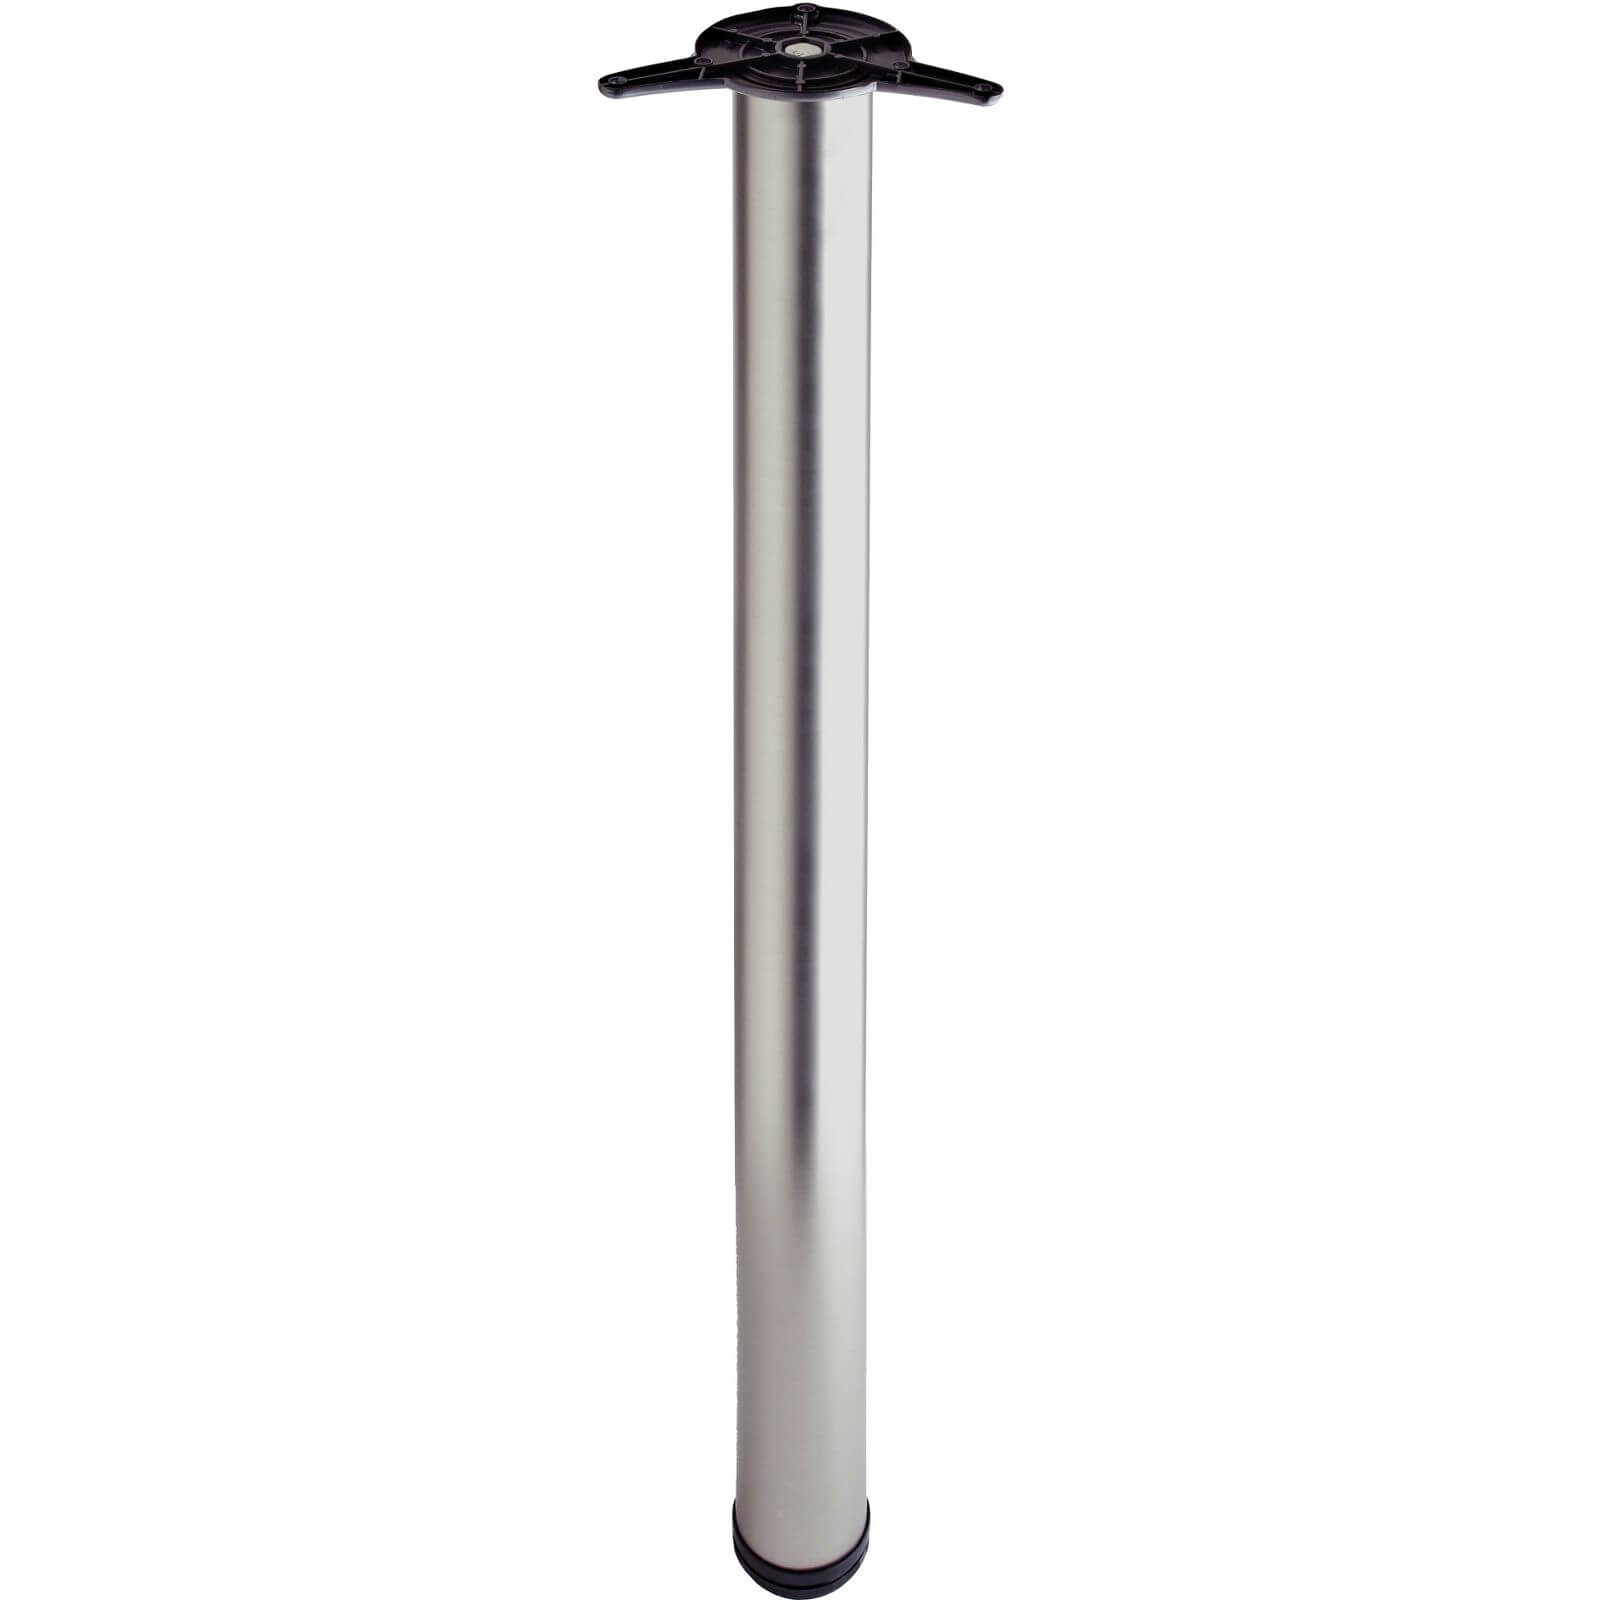 Photo of Worktop Support Leg - Brushed Nickel Finish - 60 X 870mm